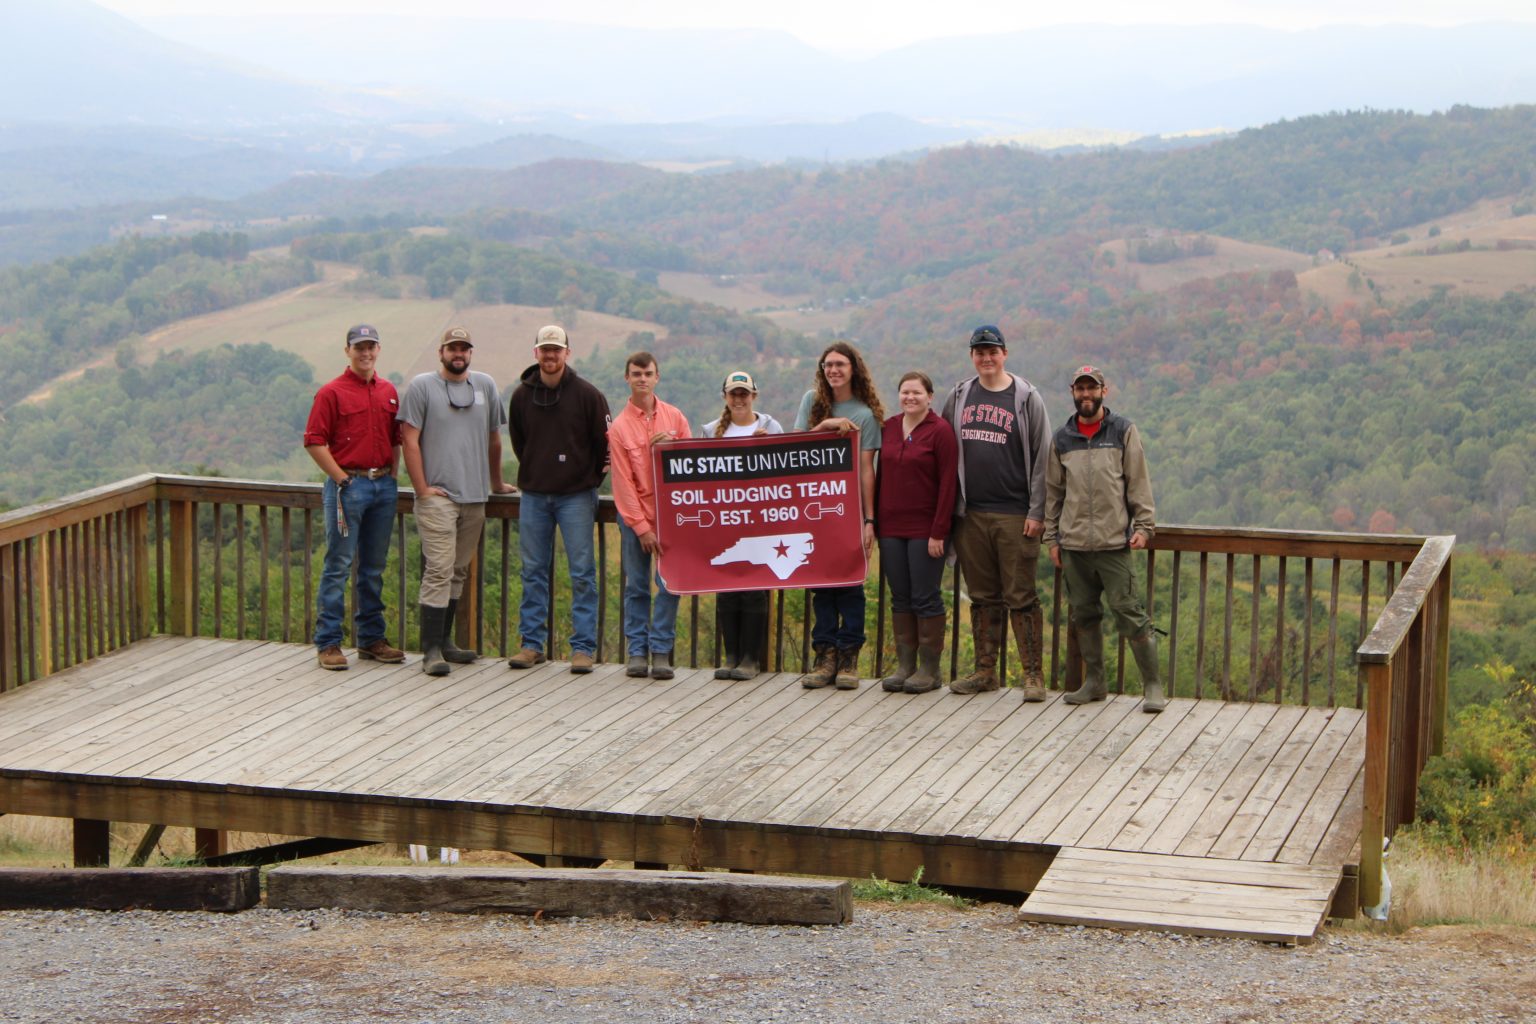 A group of students pose with an NC State soil judging team banner 